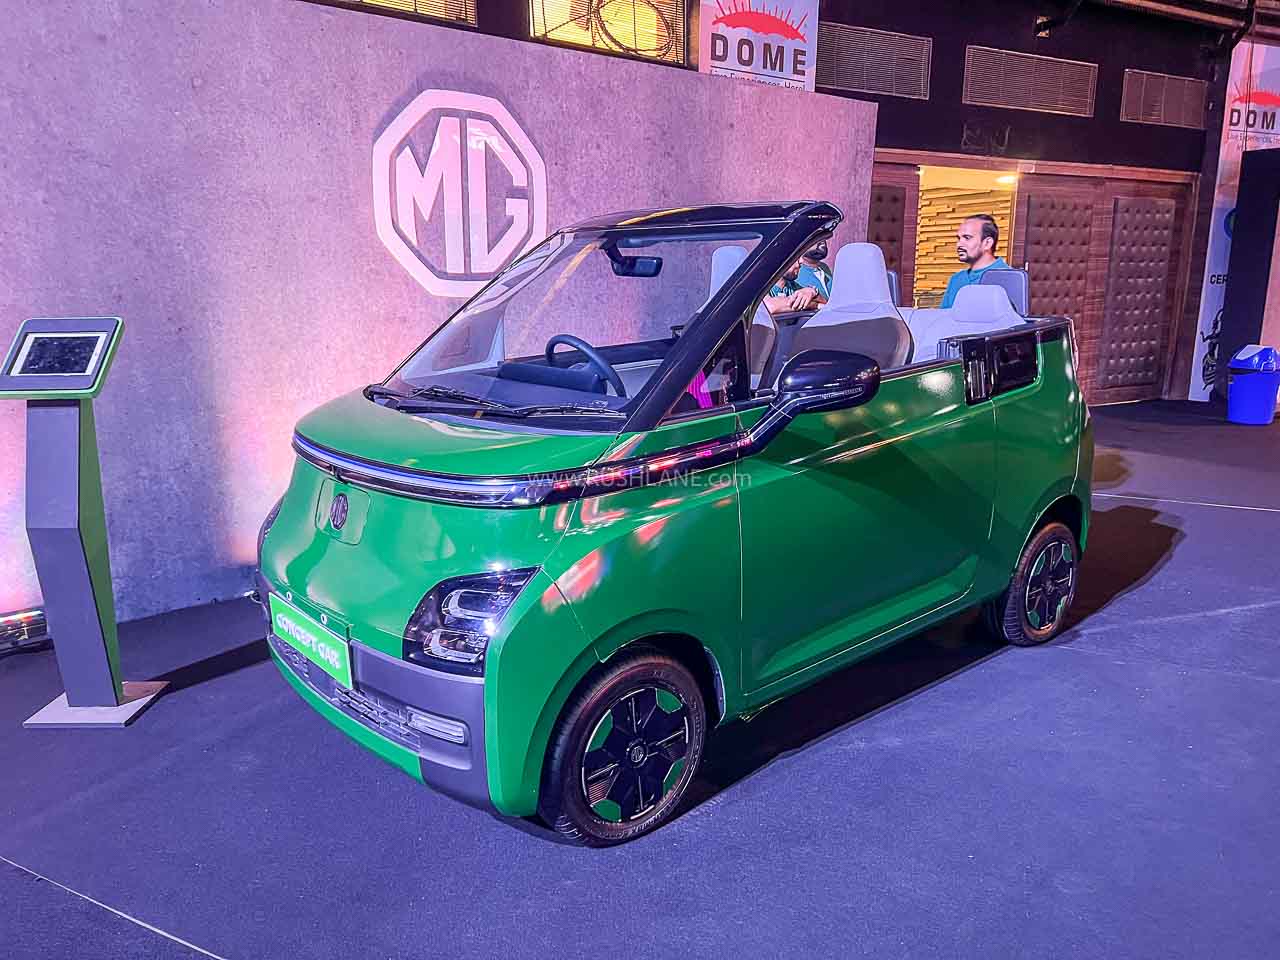 The MG is all set to launch Comet EV by April 2023  Compete with Tata Tiago with range of 300 Km.